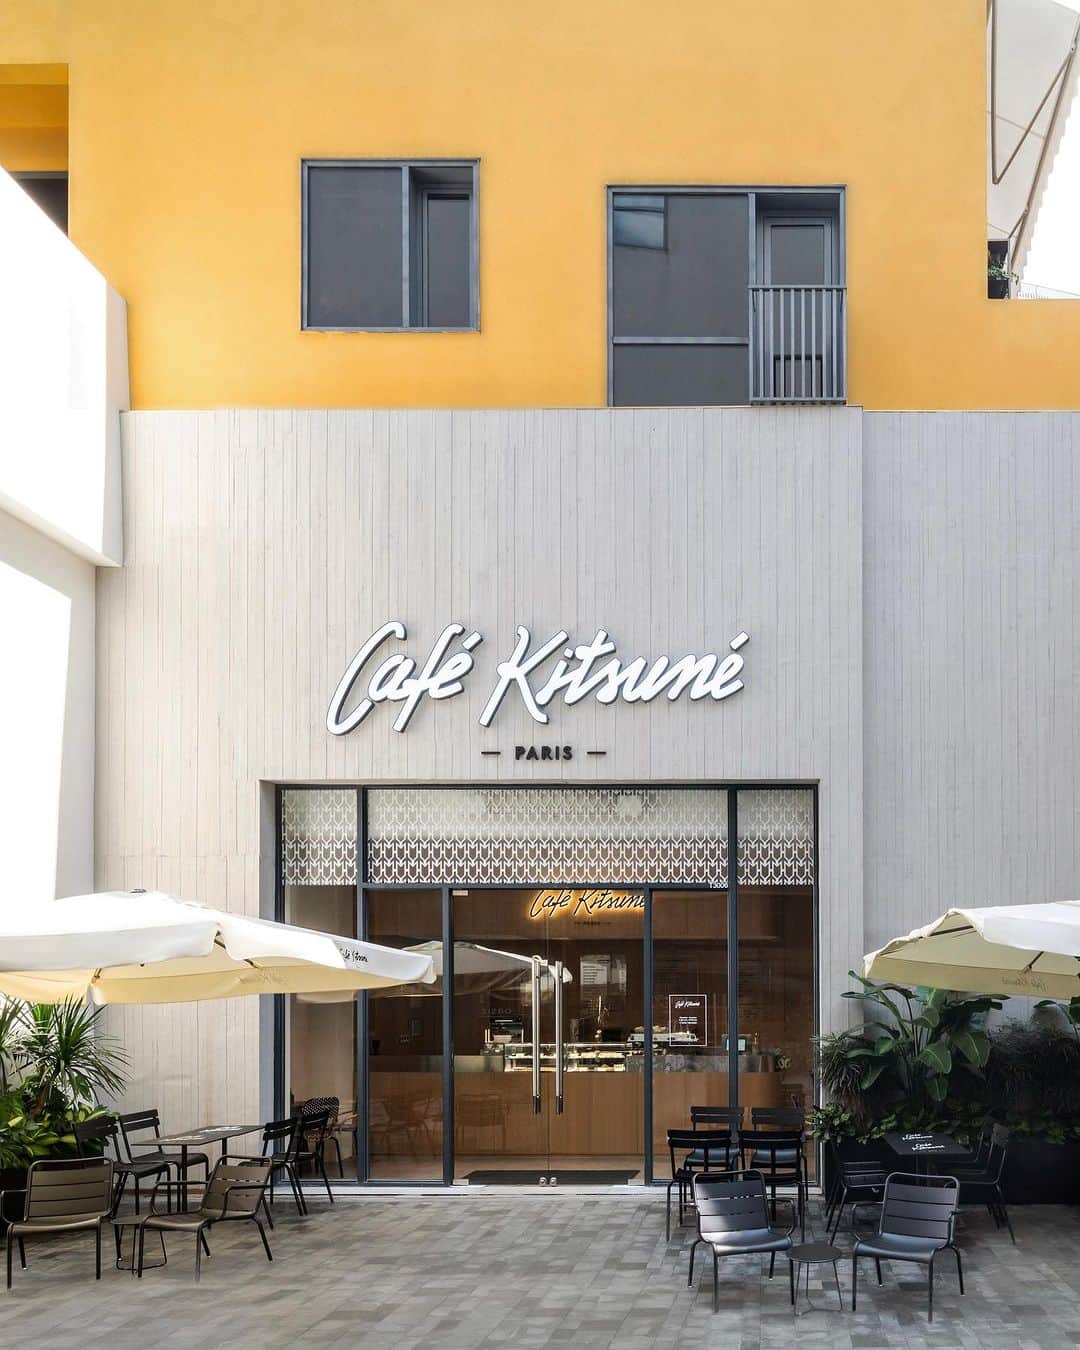 Café Kitsuné Parisのインスタグラム：「Introducing our new Café Kitsuné location at Galeries Lafayette in Shenzhen, China 🇨🇳  Come and discover an urban and modern atmosphere for your favorite coffee break, enhanced by our distinctive French-Japanese touch.   To make the interior of the café unique, we enriched the café with all-over oak cladding and divided the space into different seating areas with an urban and sophisticated atmosphere.  Take a seat at the #CafeKitsuneUpperhills’ terrace to taste our sweet specialties and enjoy the authentic #CafeKitsune experience ✨  👉 Café Kitsuné Upperhills Shenzhen 广东省深圳市福田区华富街道皇岗路5001号深业上城三楼 Cafe Kitsune, T3006, 3rd Floor, UpperHills, No. 5001 Huanggang Road, Huafu Street, Futian District, Shenzhen City, Guangdong Province Monday-Sunday: 8:30am-8:30pm」